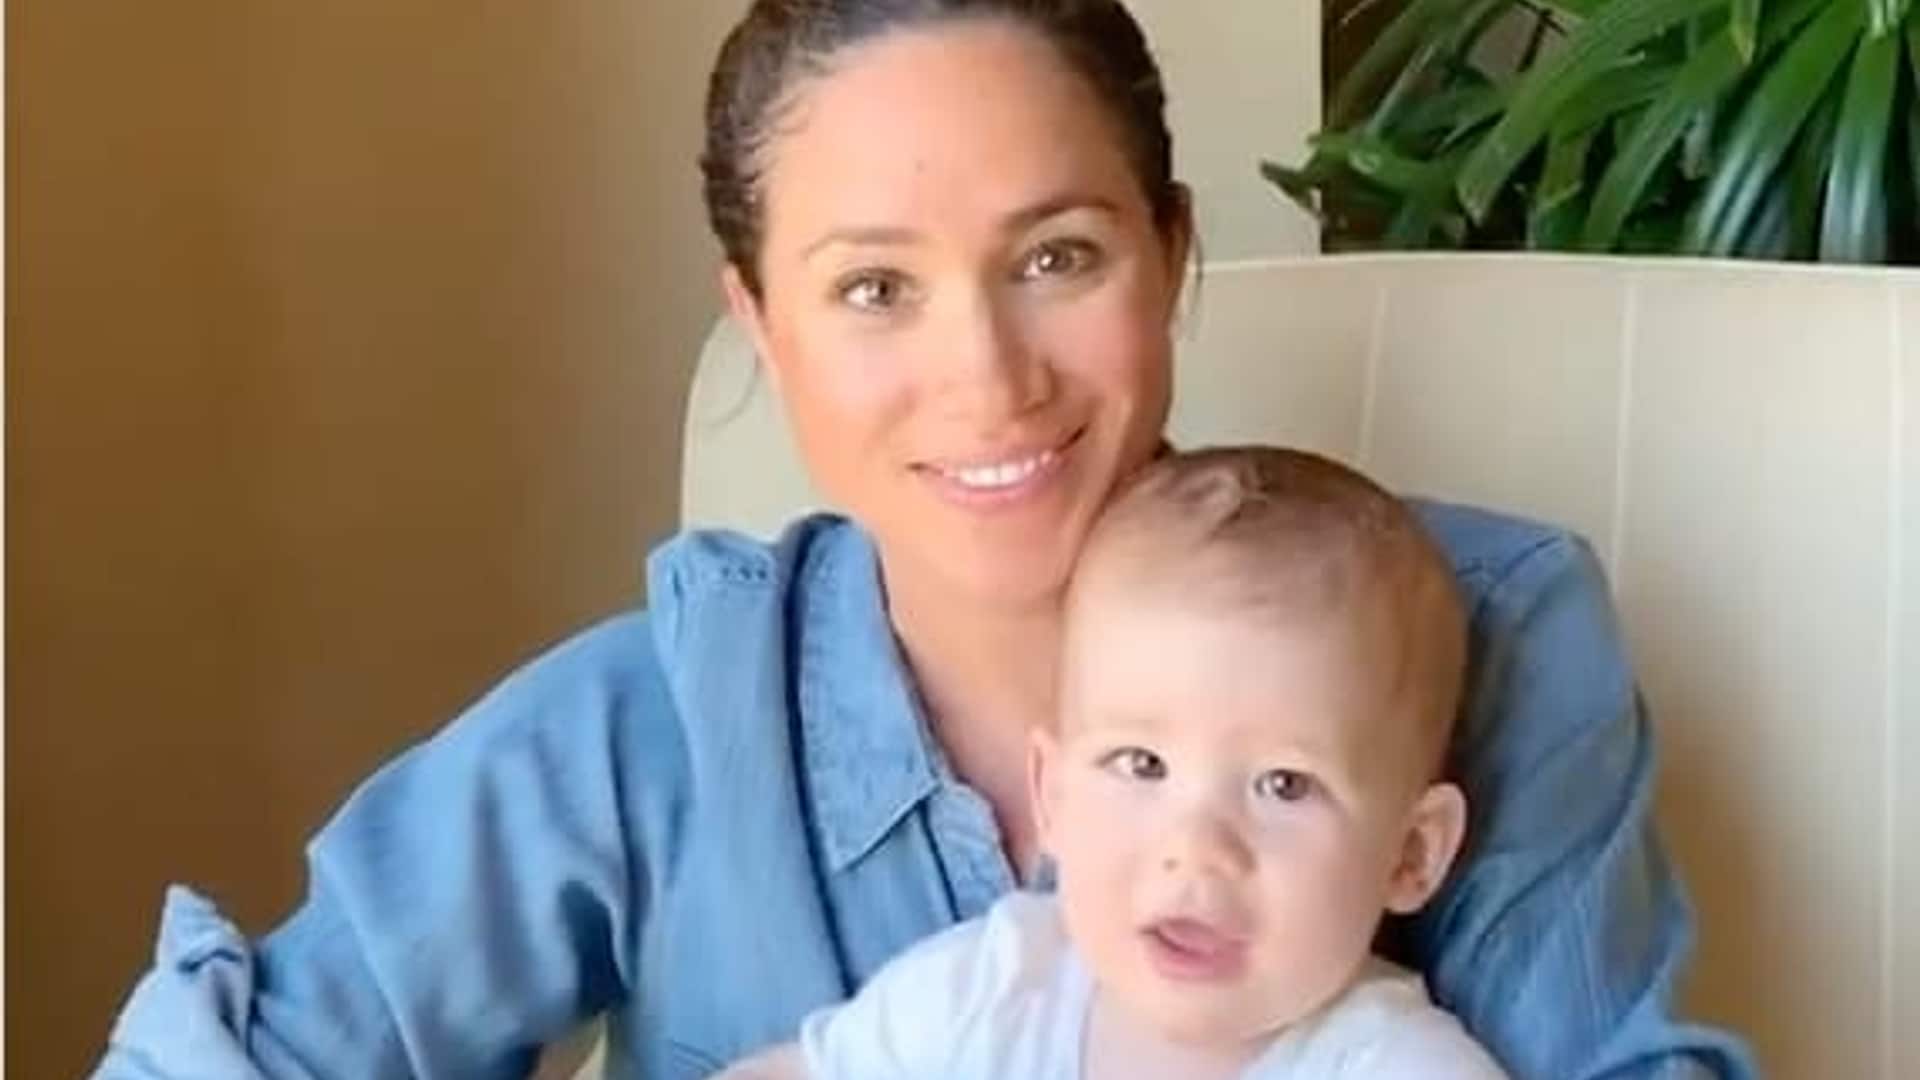 Meghan Markle and Prince Harry's son Archie started walking during quarantine